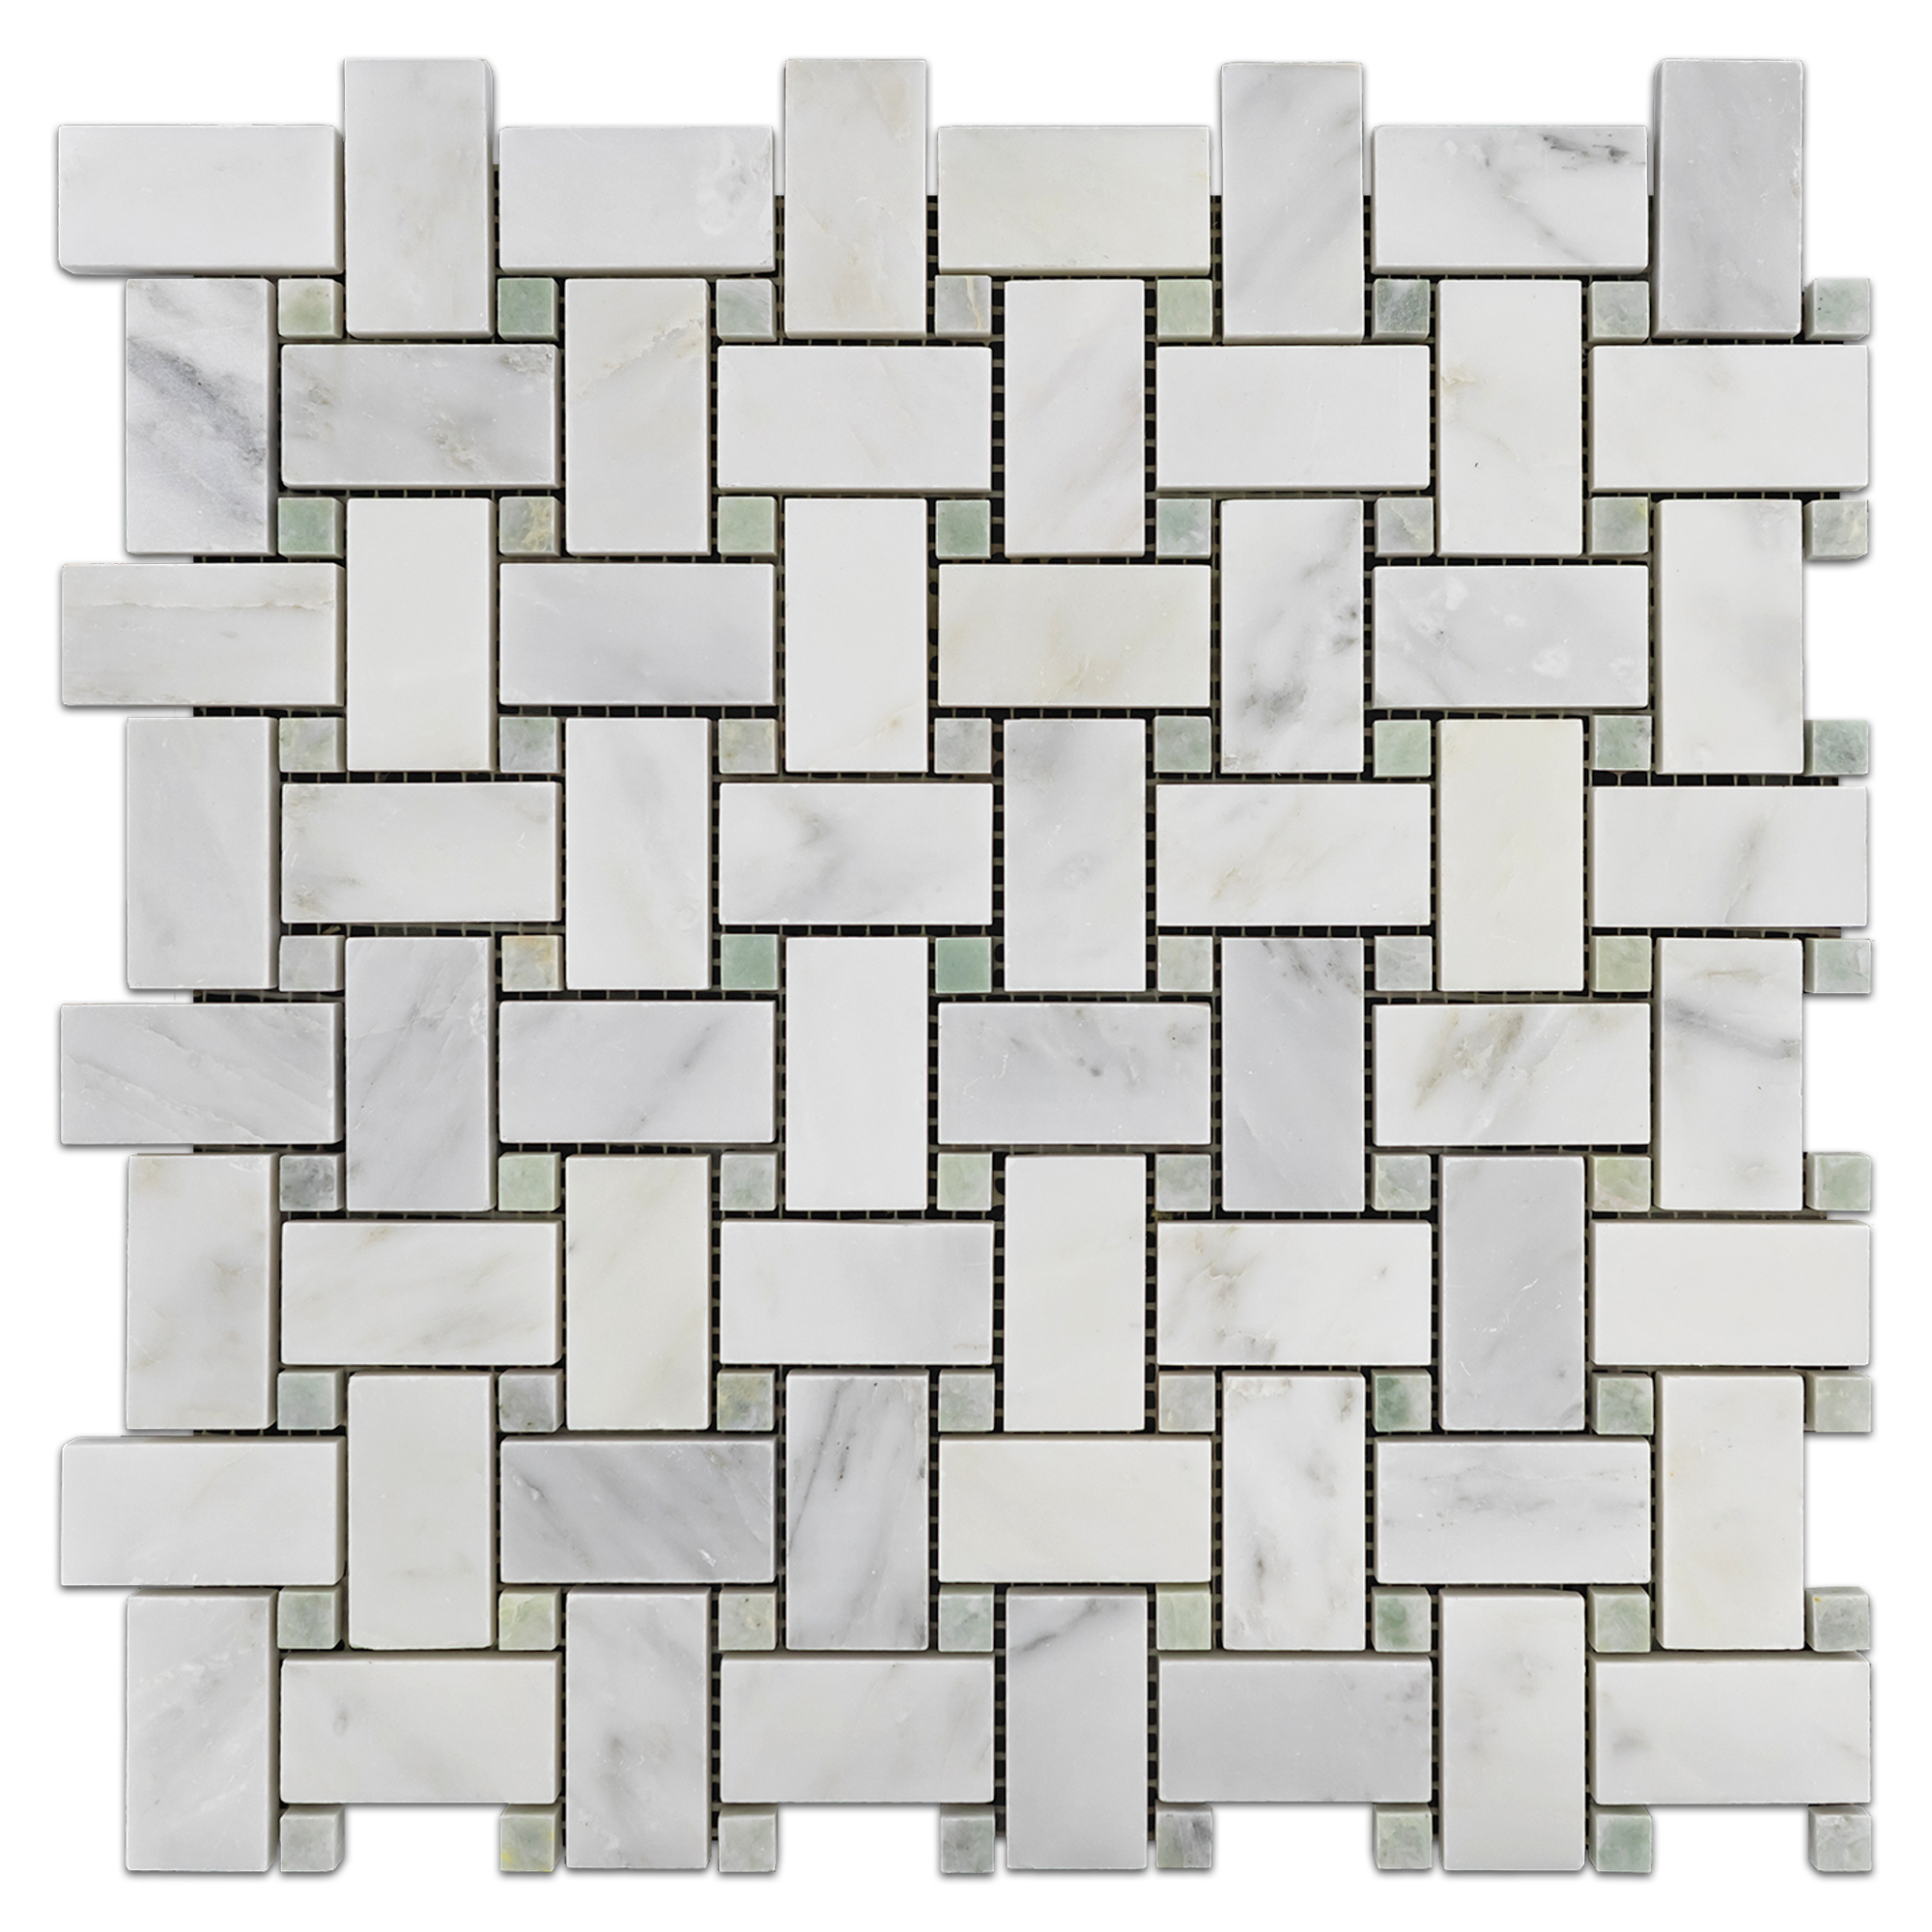 Elon Pearl White Ming Green Marble Stone Blend Basketweave Field Mosaic 12x12x0.375 Honed - Surface Group International Product